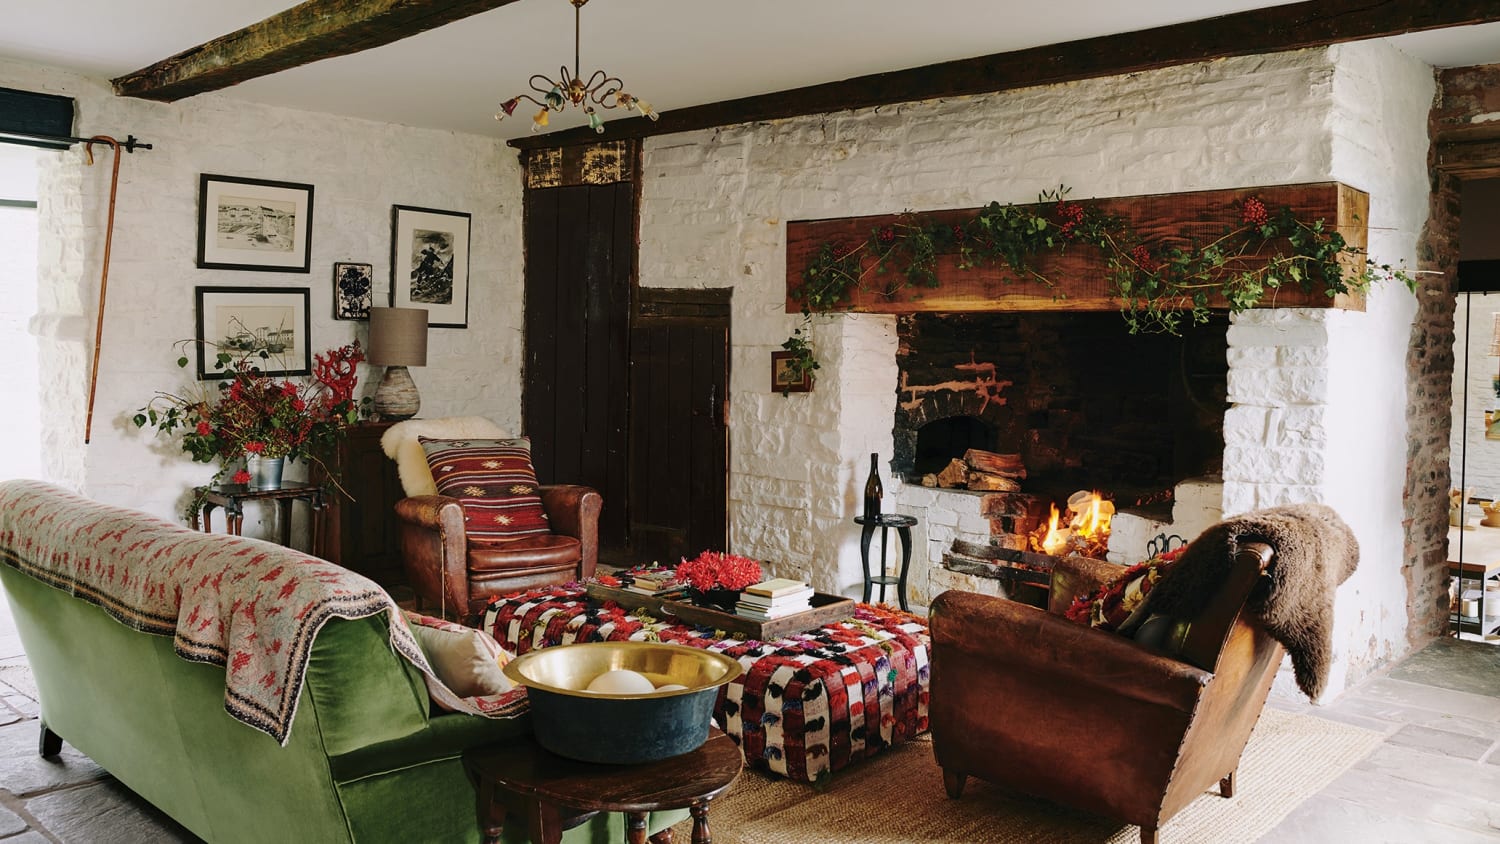 How to get the look of a classic English country cottage